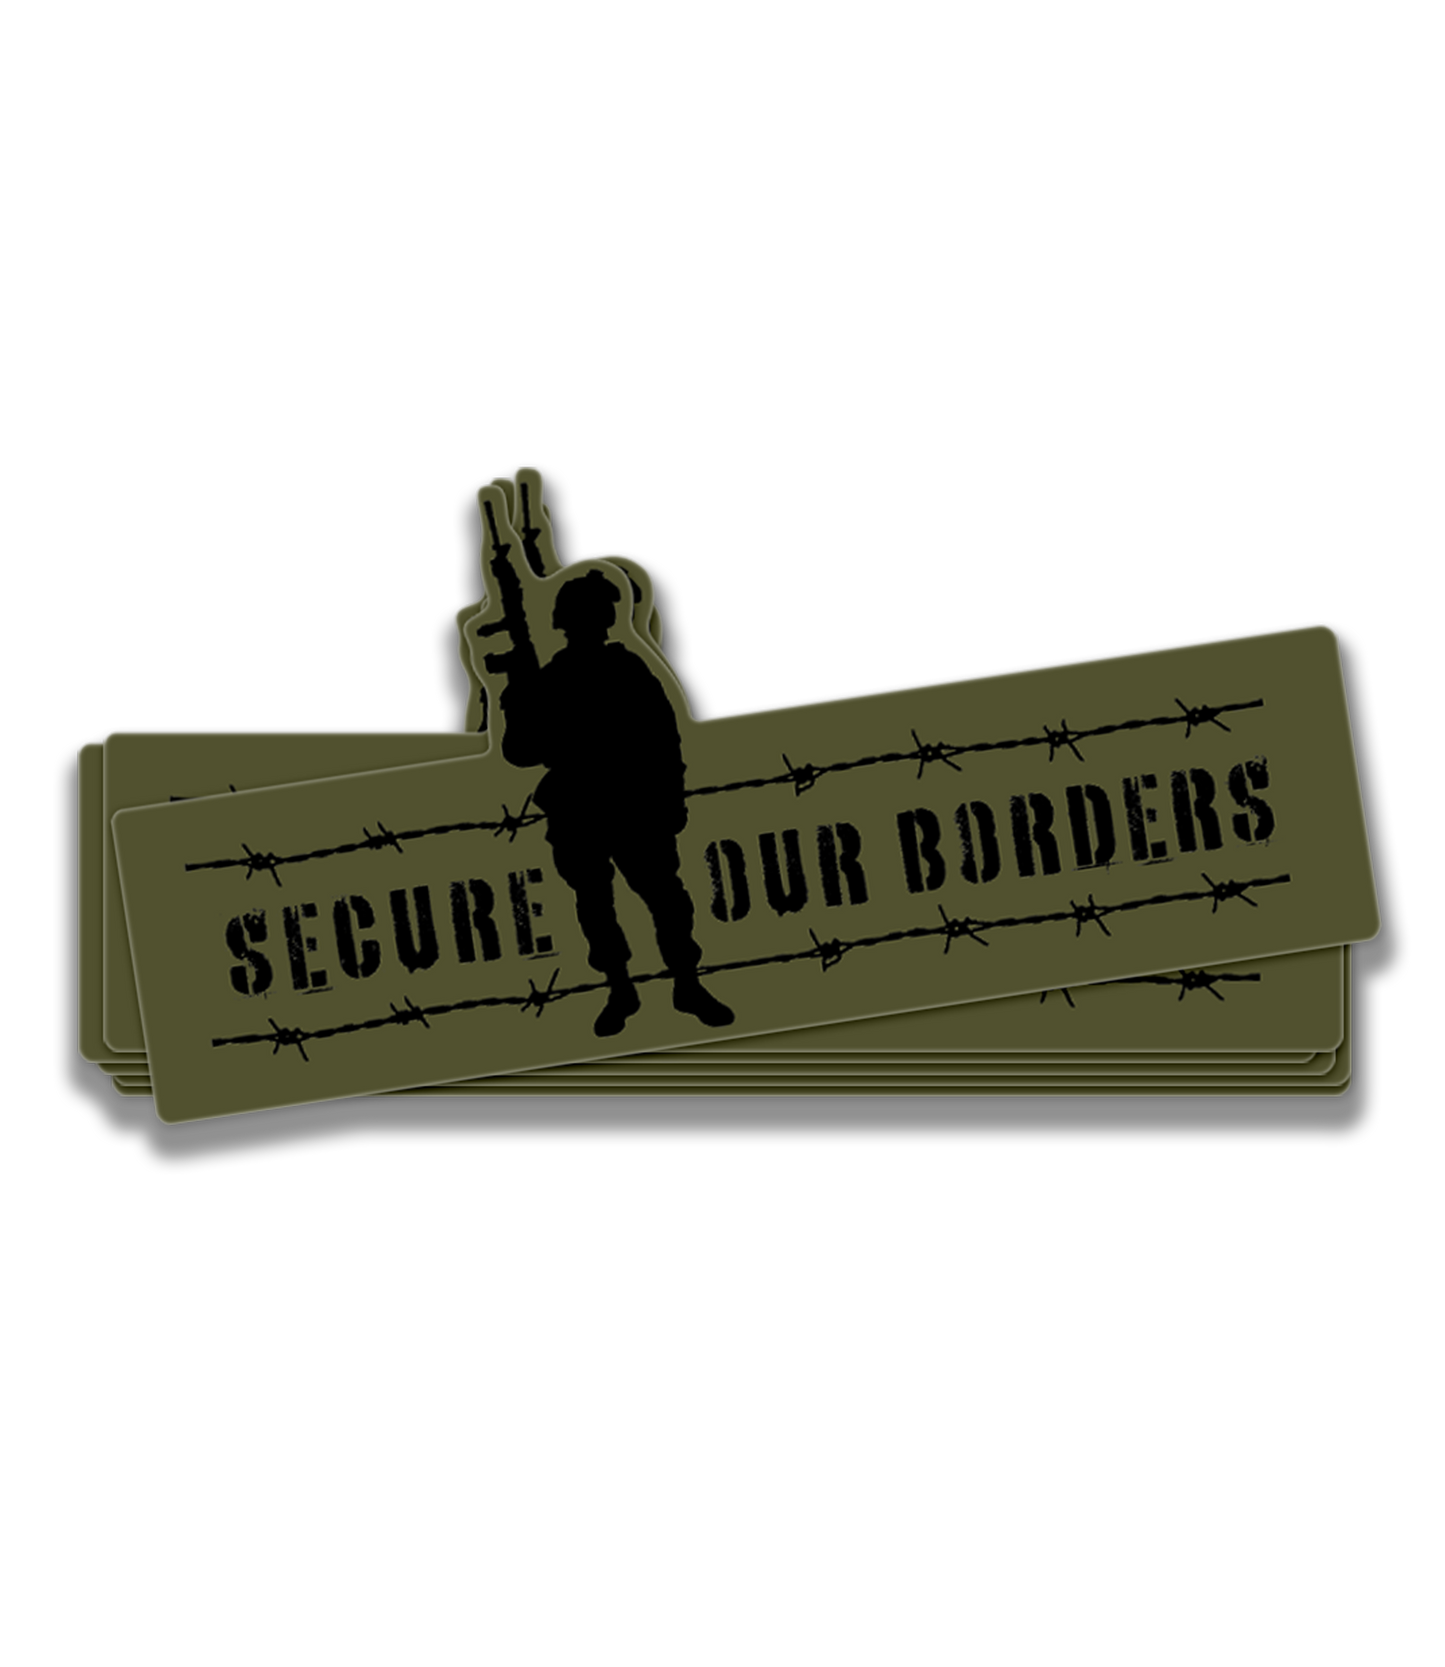 Secure Our Borders Soldier Decal